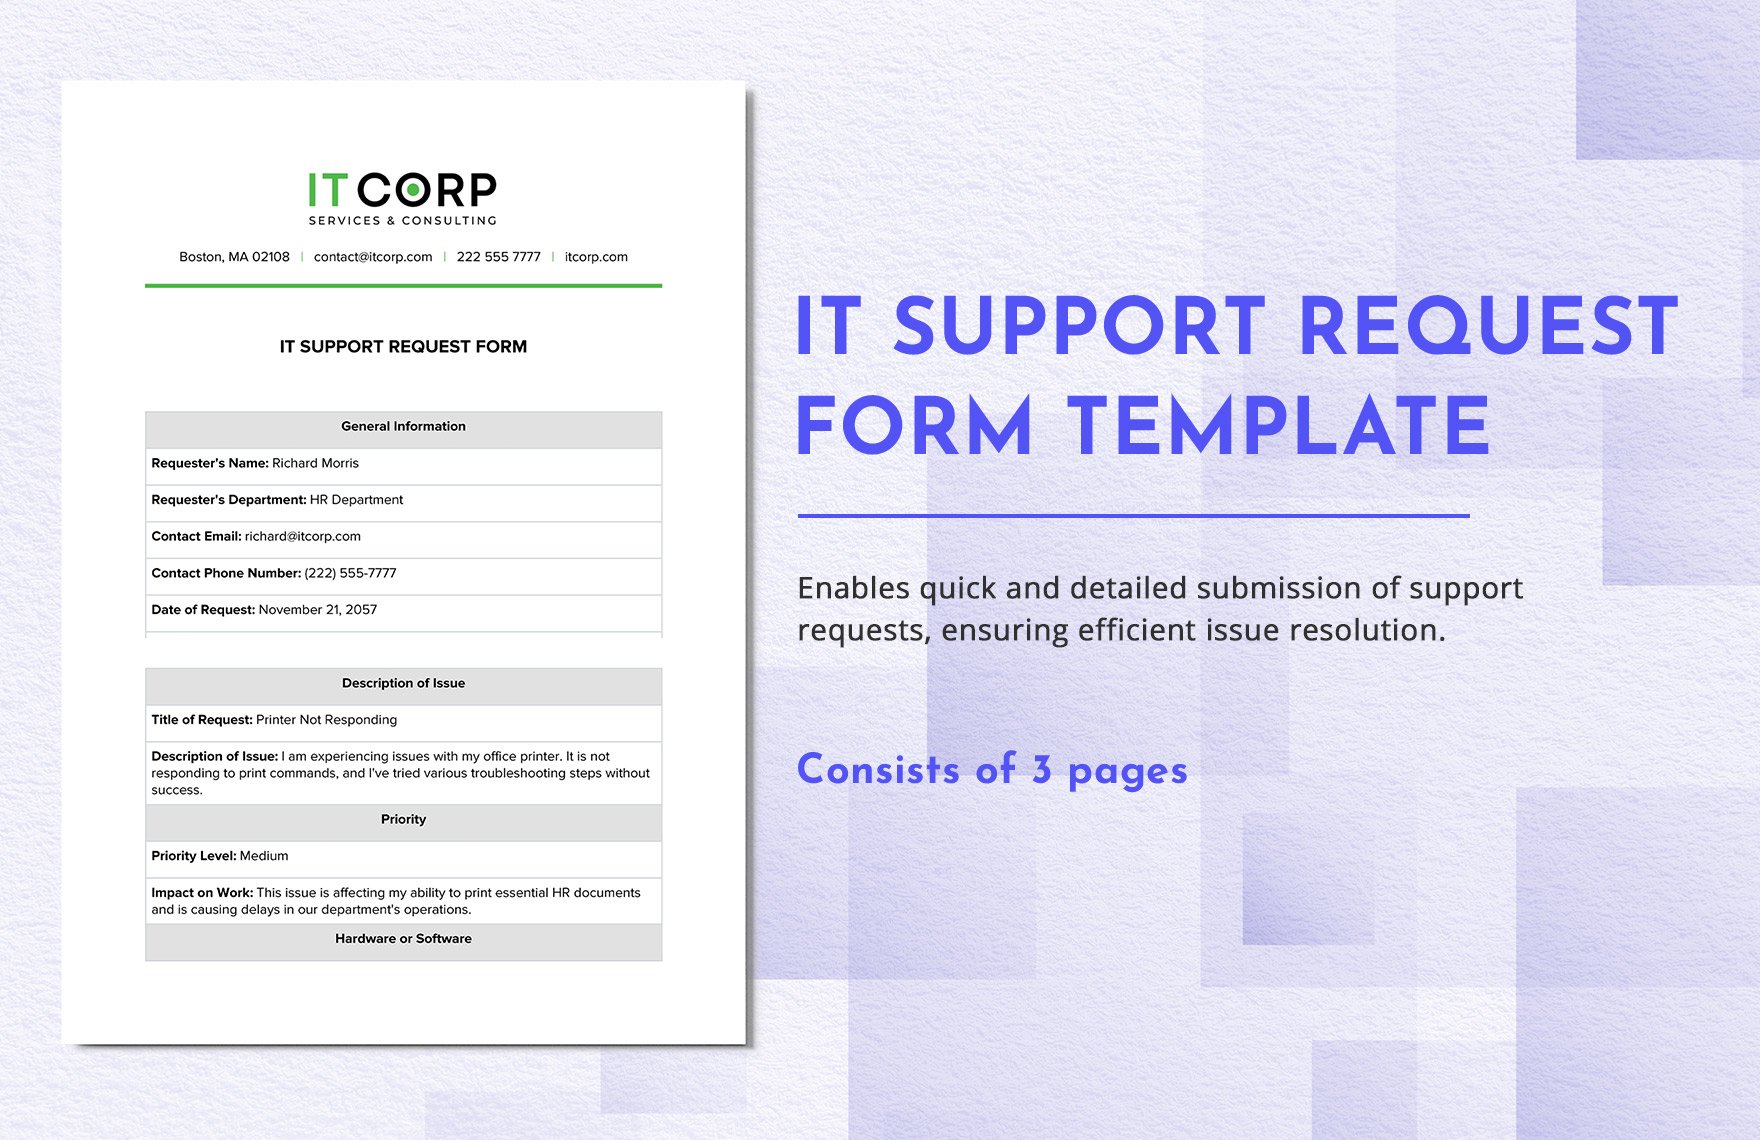 IT Support Request Form Template